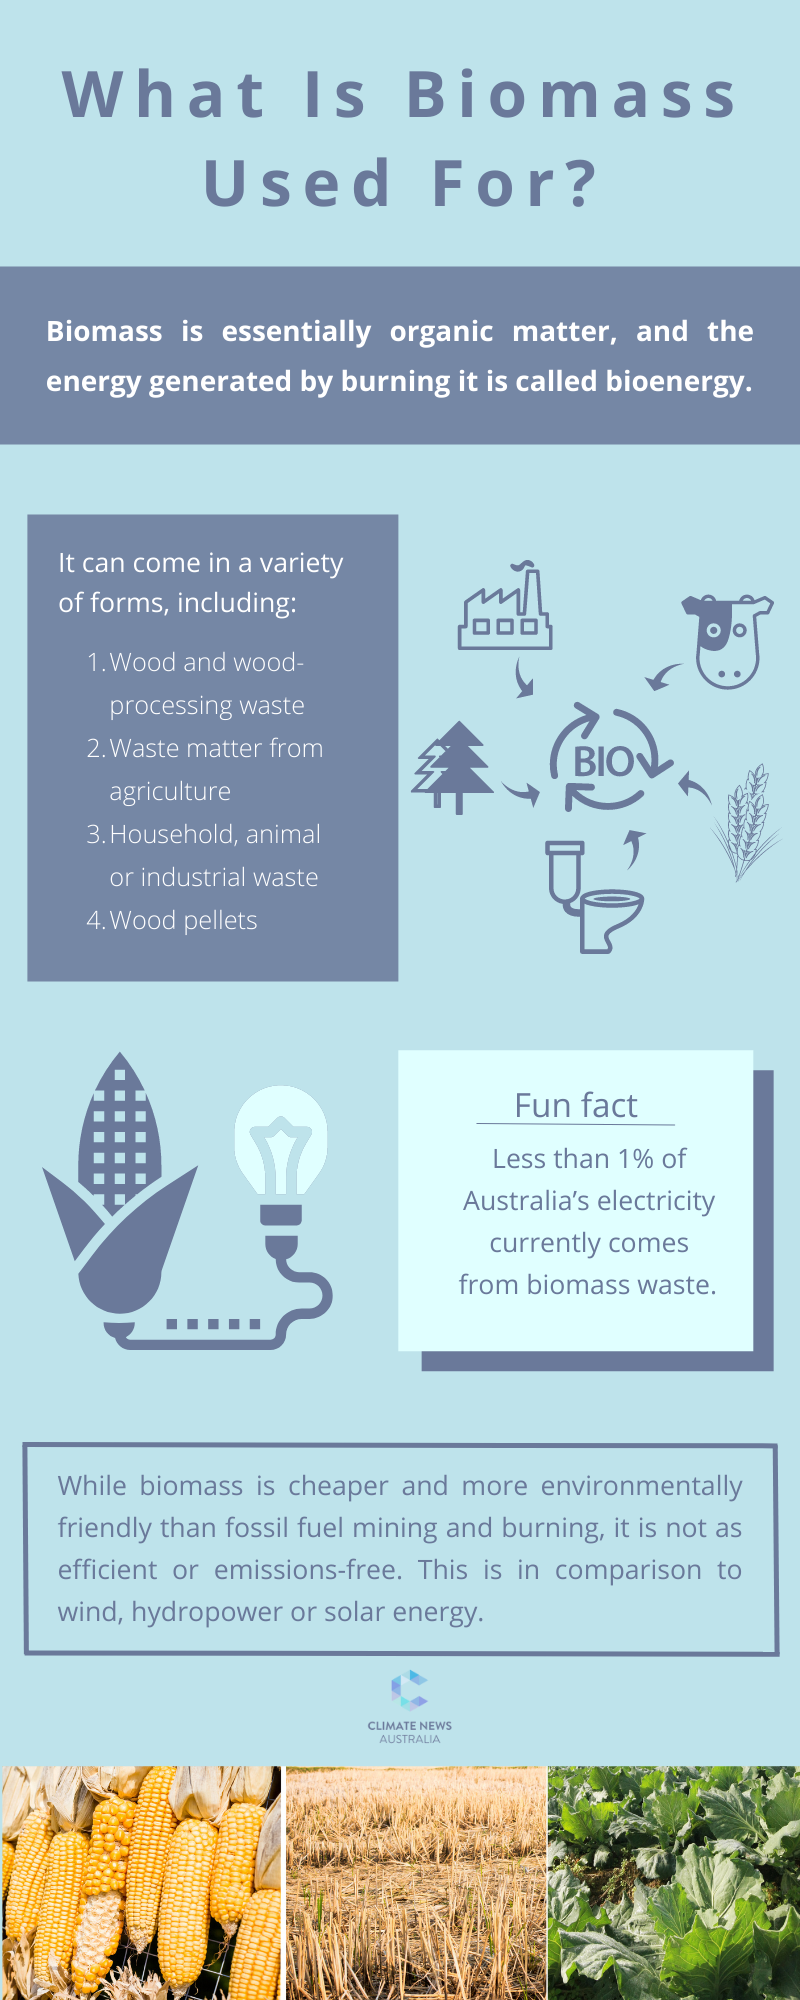 What Is Biomass Used For?